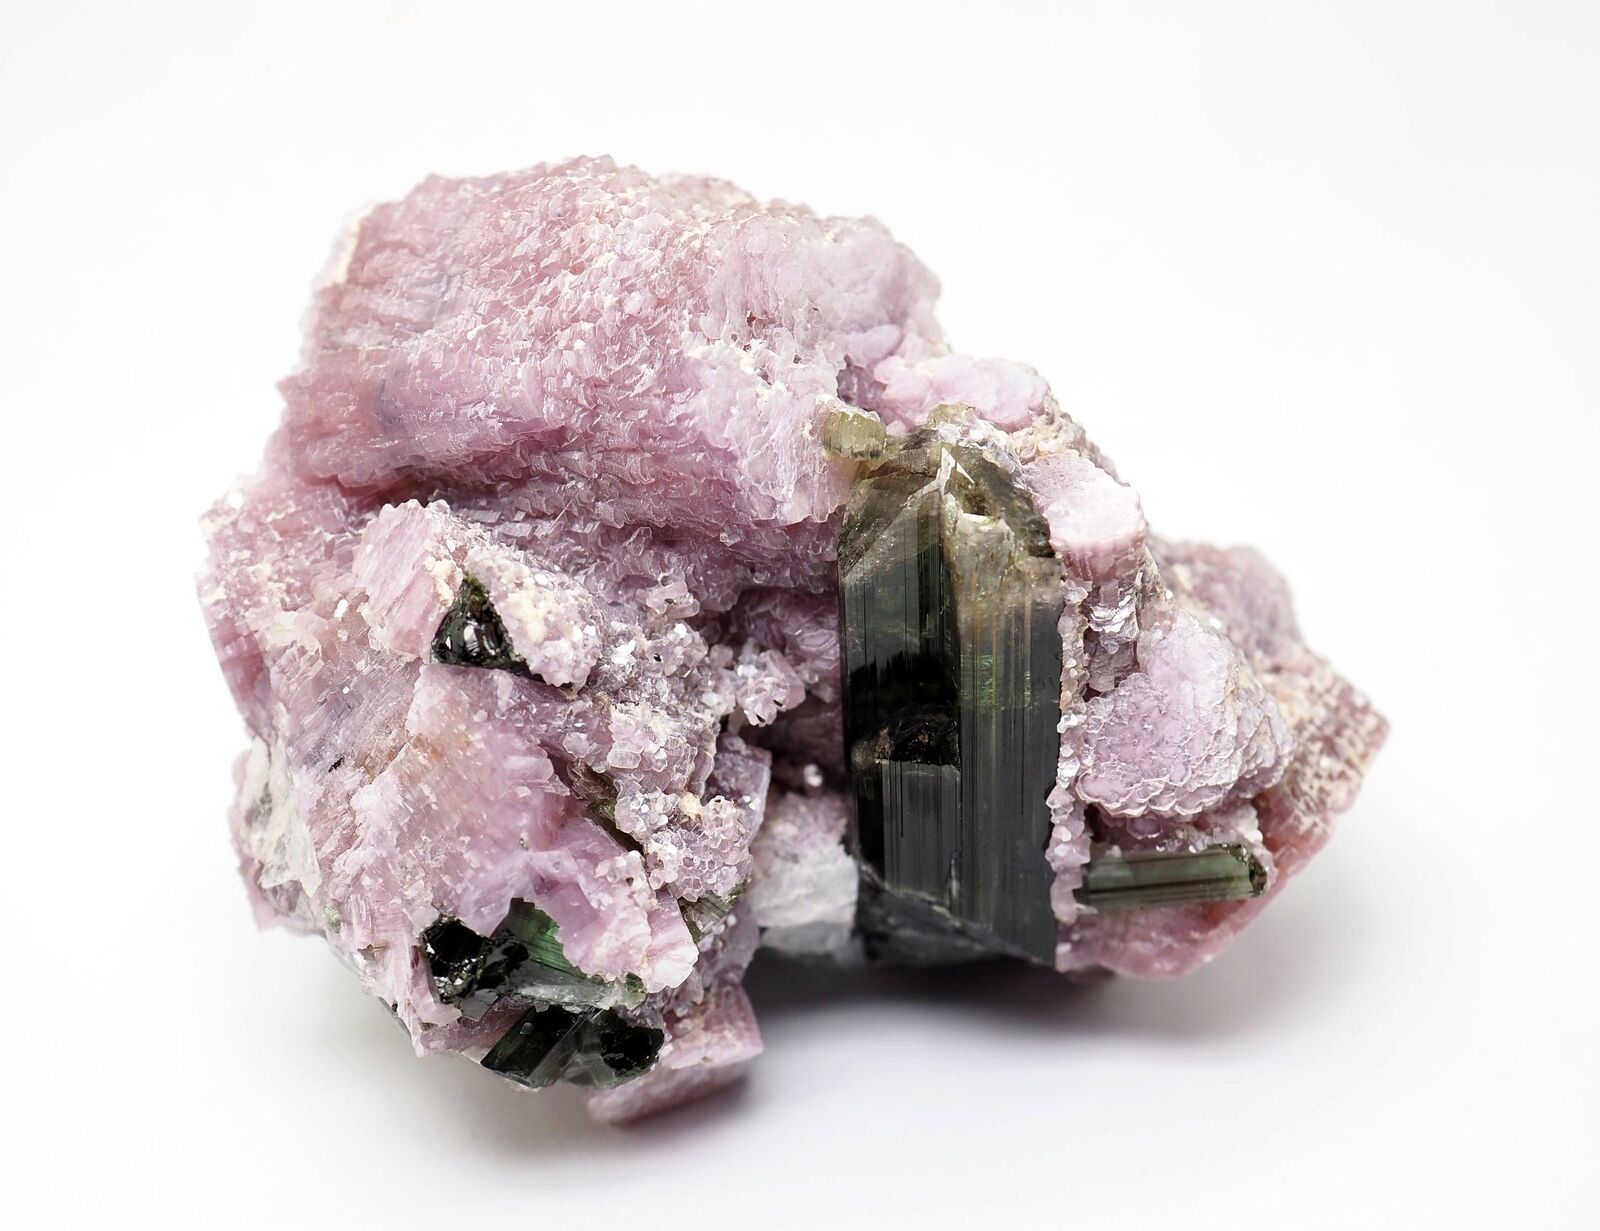 Tourmaline crystals with Lepidolite from Brazil natural large specimen - 236gm